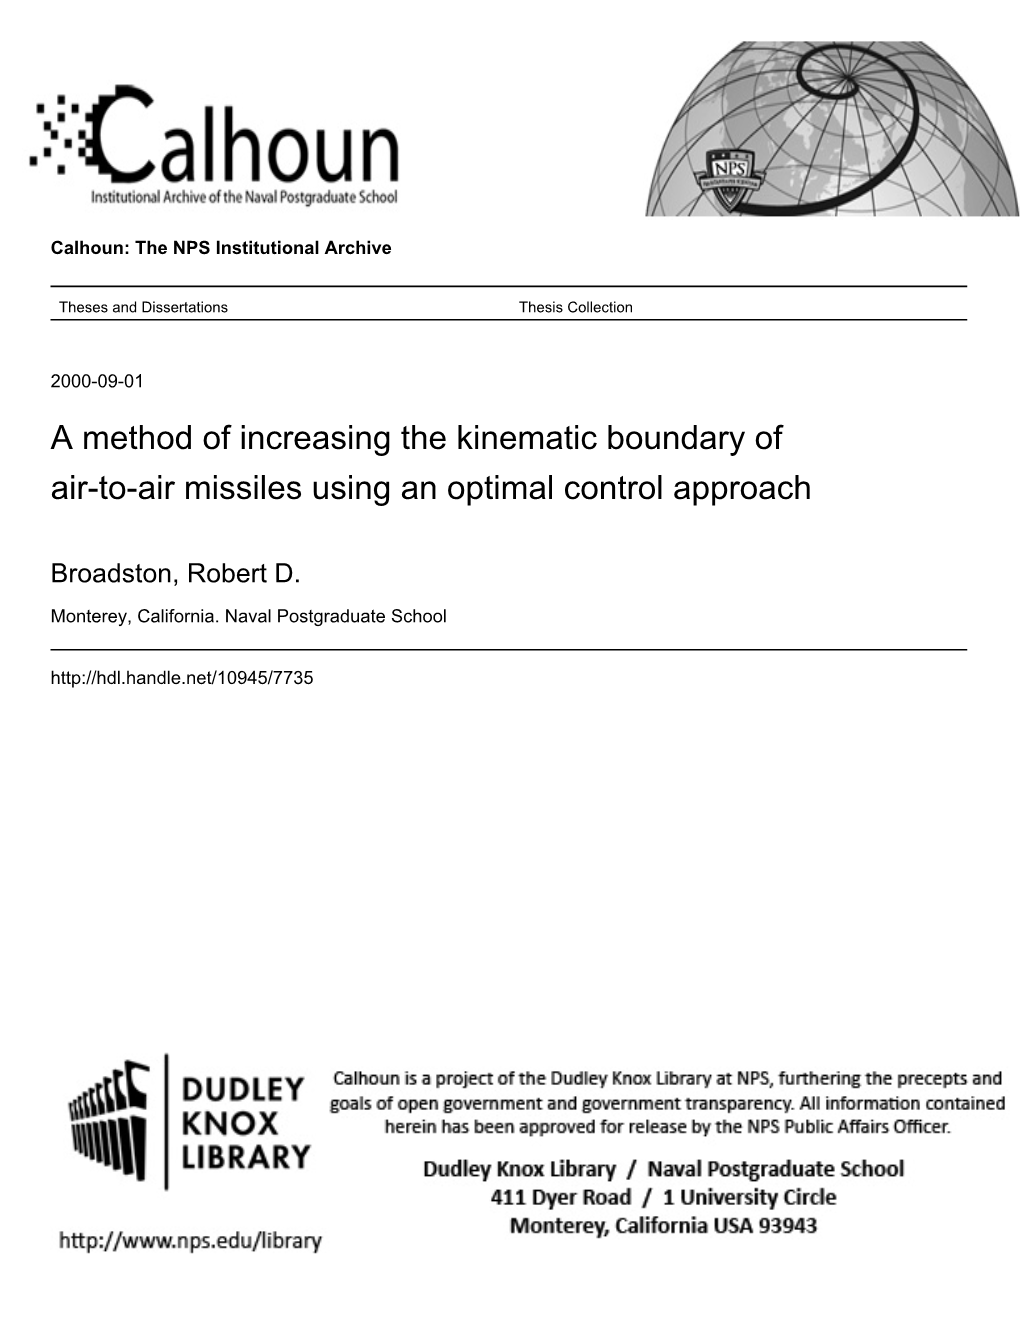 A Method of Increasing the Kinematic Boundary of Air-To-Air Missiles Using an Optimal Control Approach